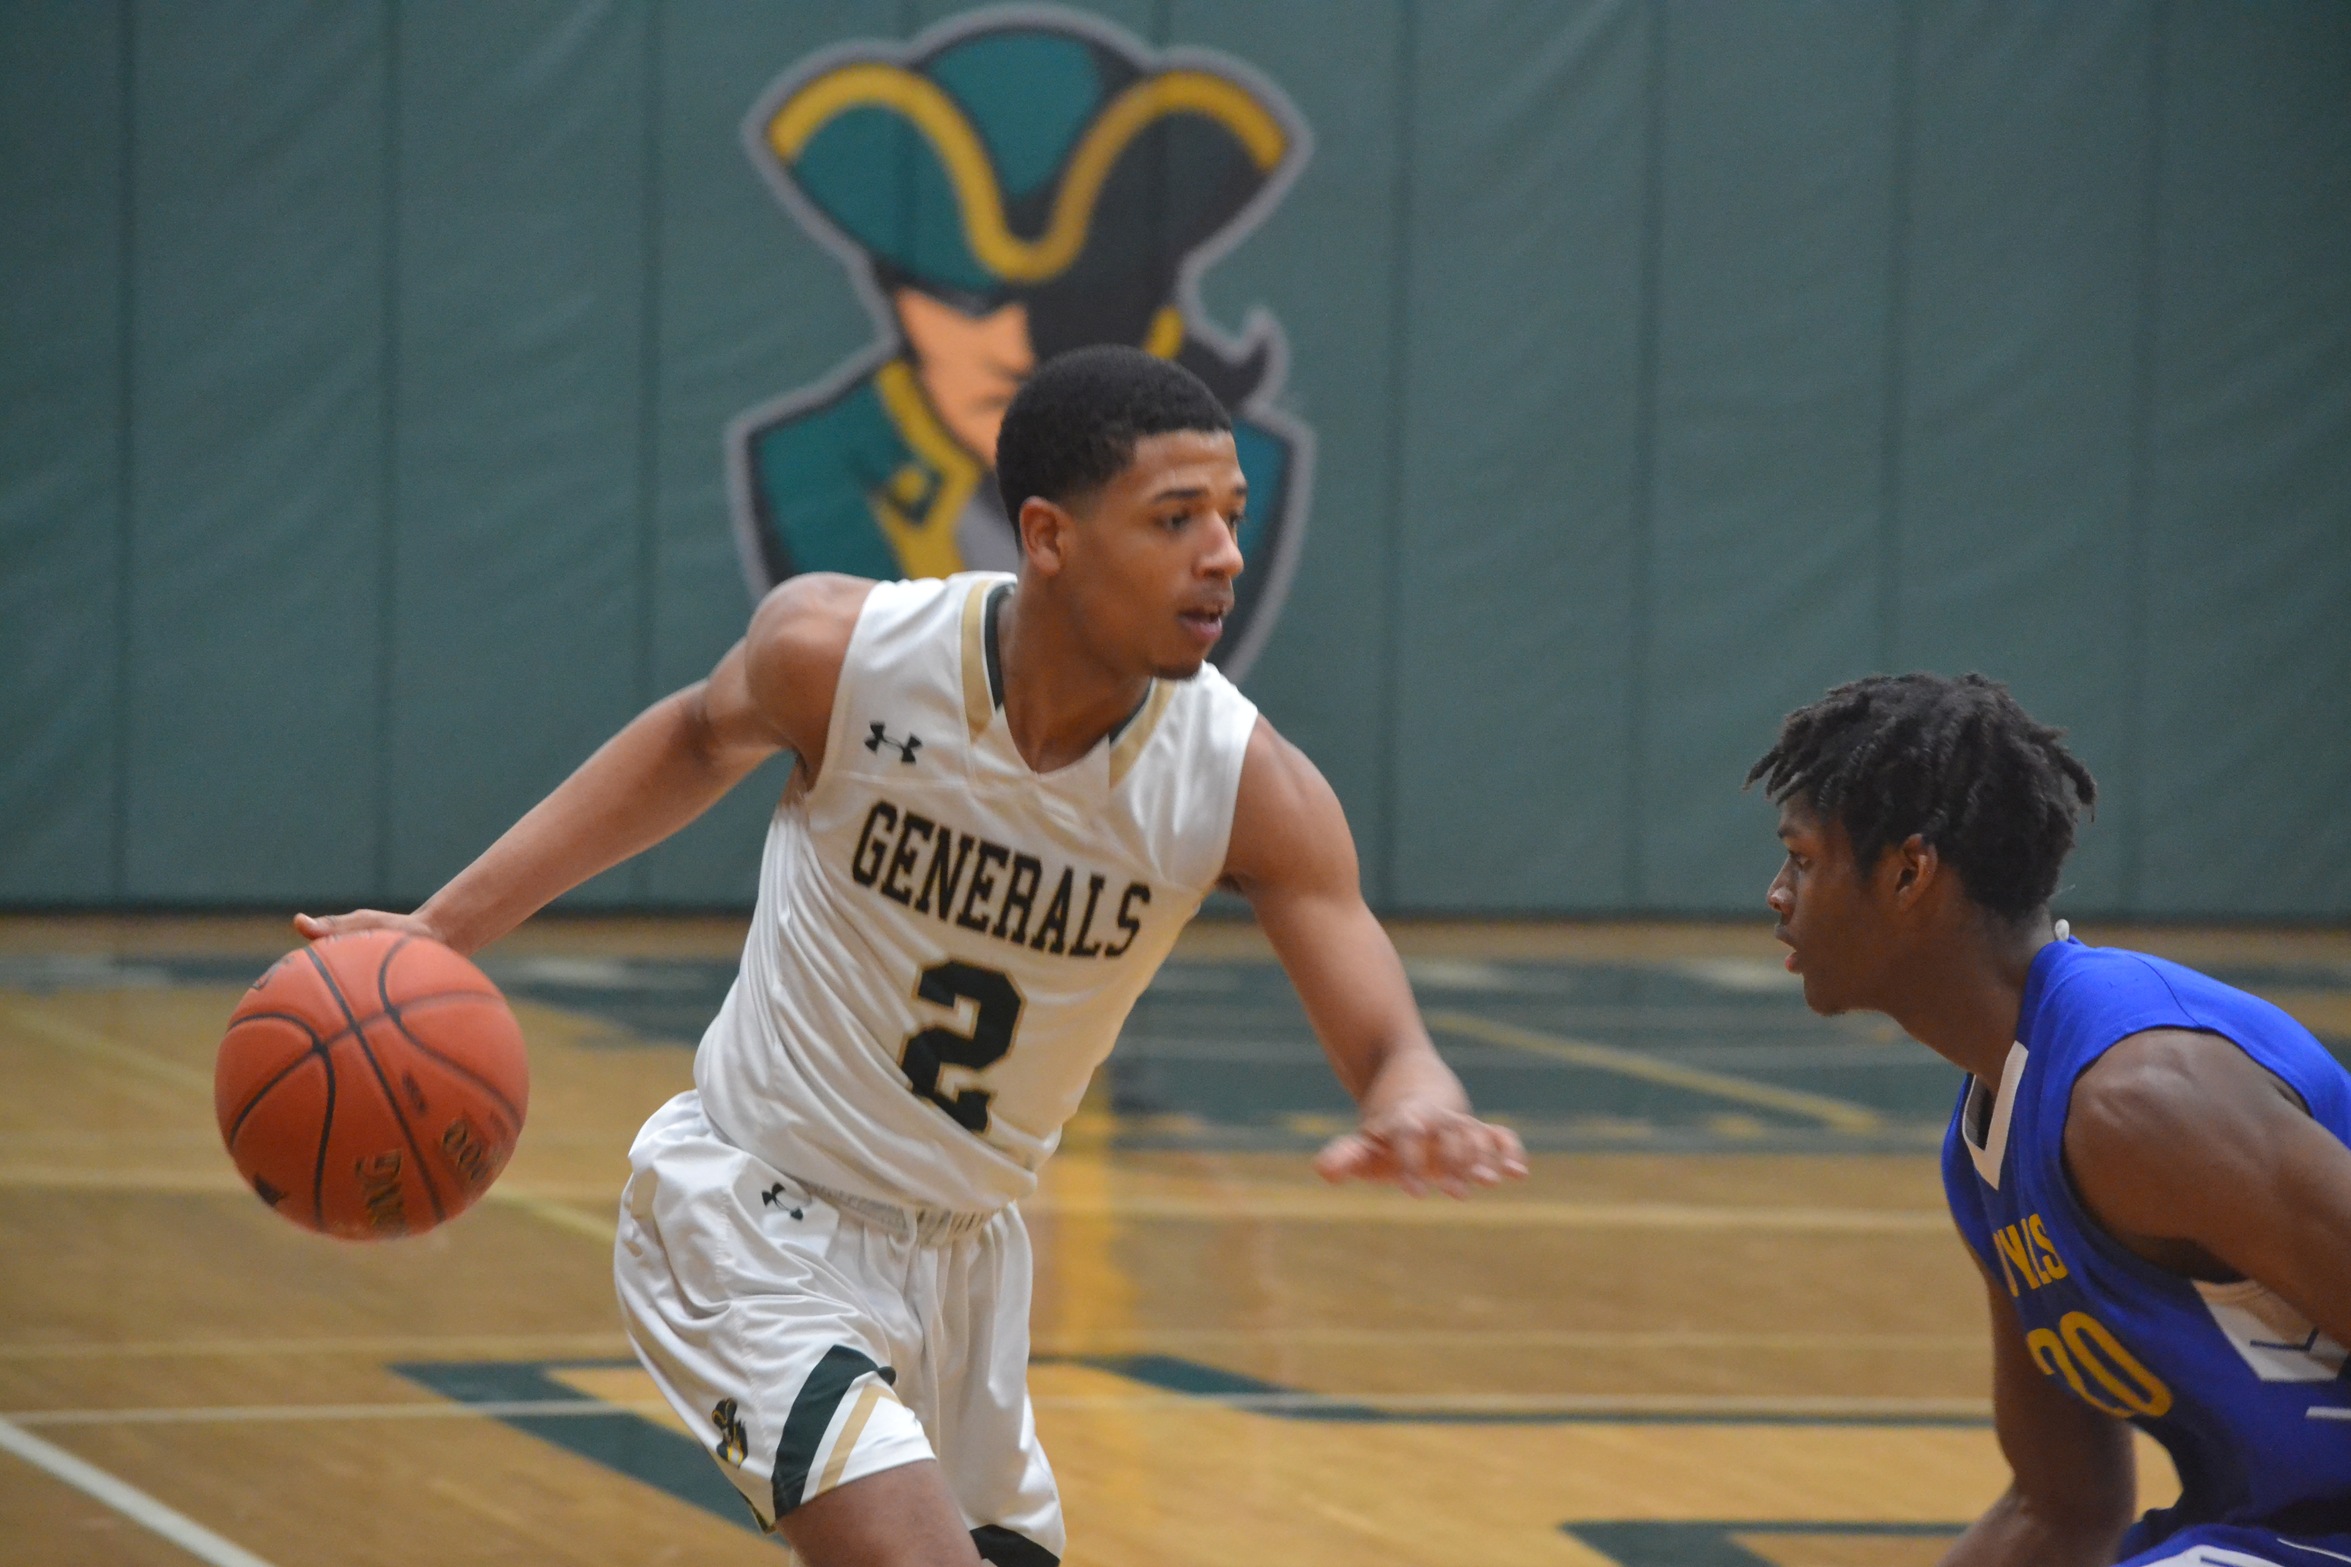 HERKIMER MEN'S BASKETBALL WINS SECOND IN A ROW, MOVE TO 3-1 ON YEAR WITH 74-61 WIN OVER TC-3